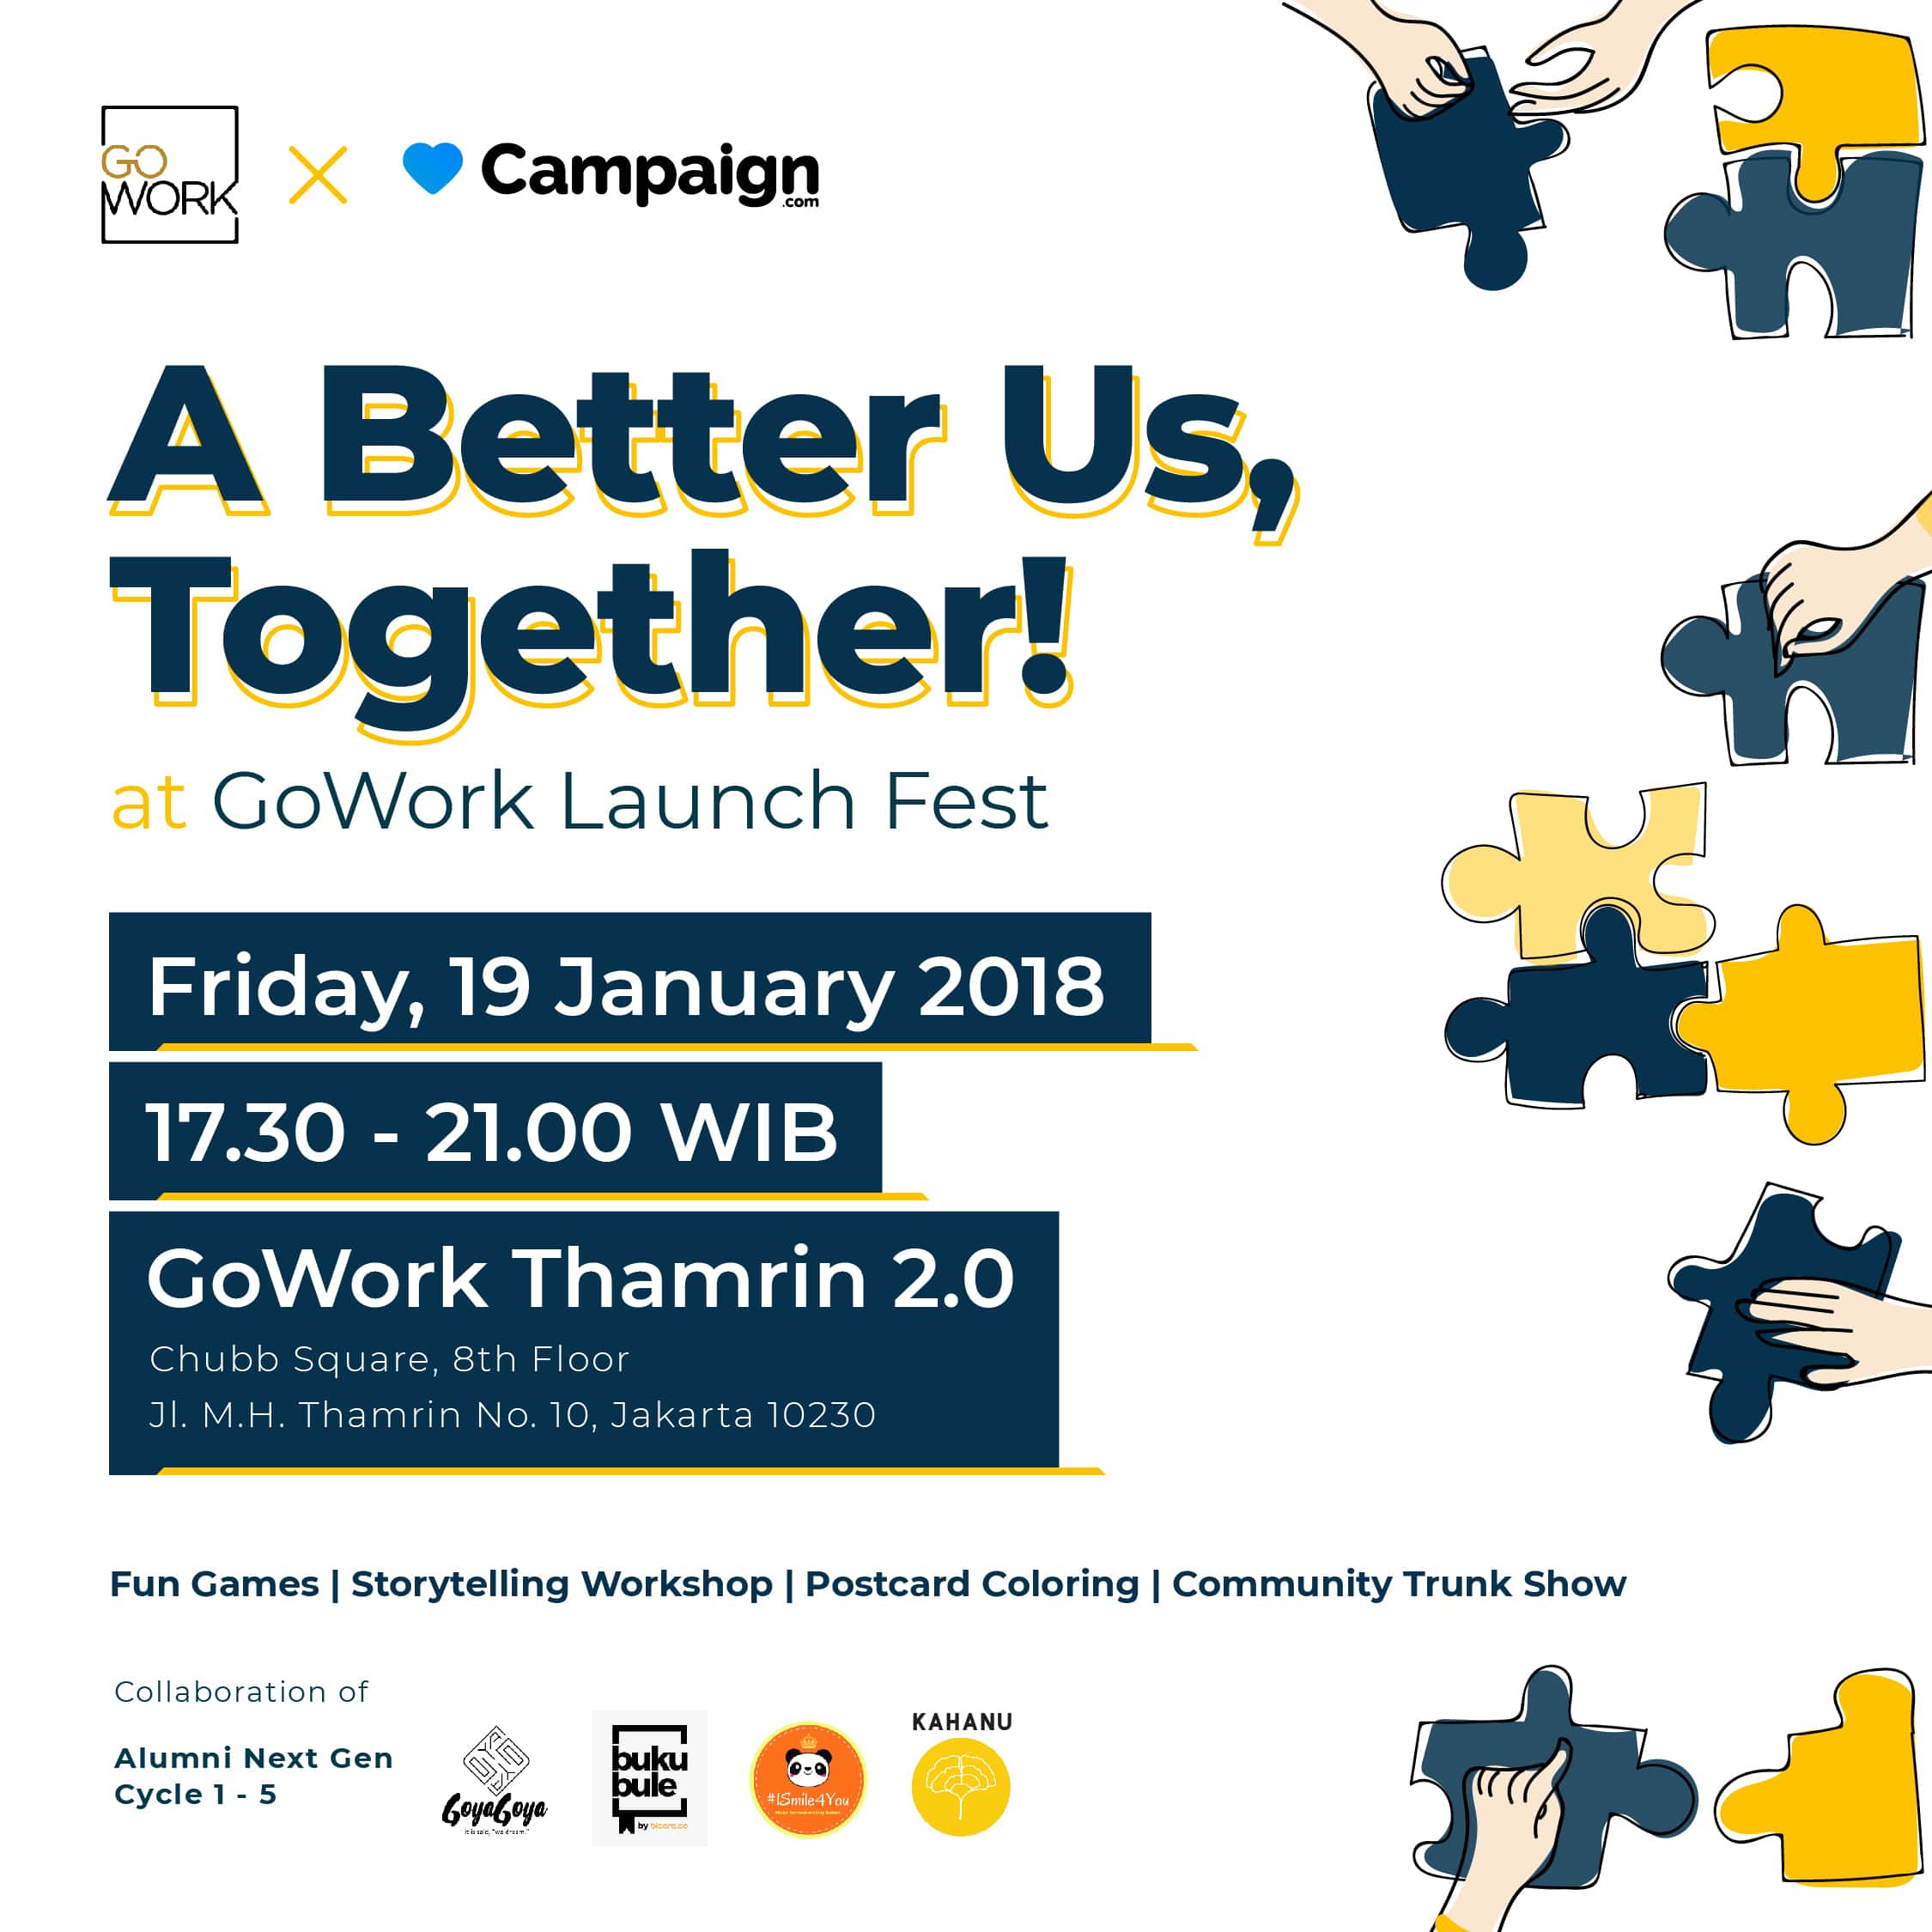 GoWork x Campaign.com – “A Better Us, Together” (19 January 2018)